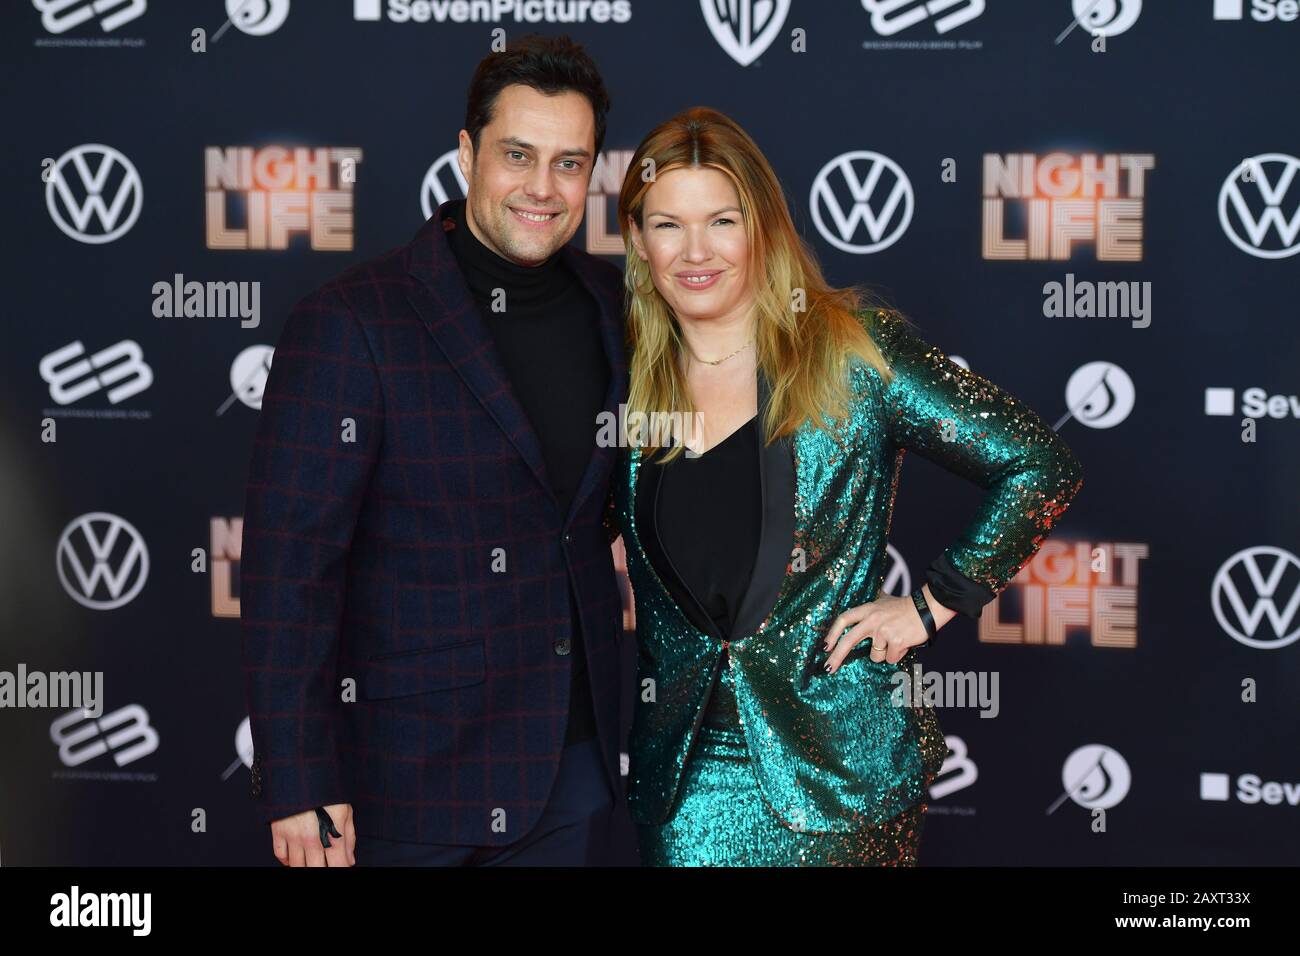 Sports presenter Jessica Kastrop with her husband Roman Libbertz. Red carpet, red carpet, arrival. Film premiere, cinema premiere NIGHTLIFE on February 12th, 2020 at Mathaeser Kino in Muenchen, | usage worldwide Stock Photo